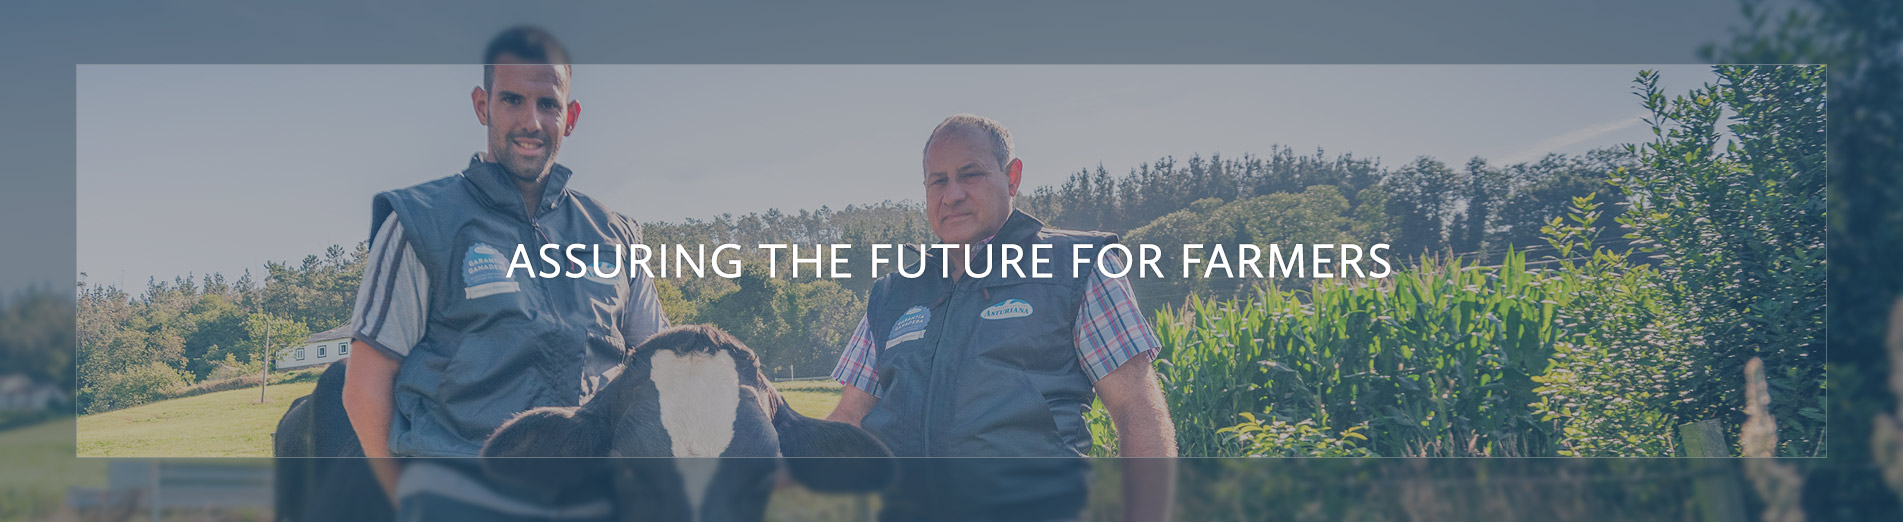 Assuring the future for farmers